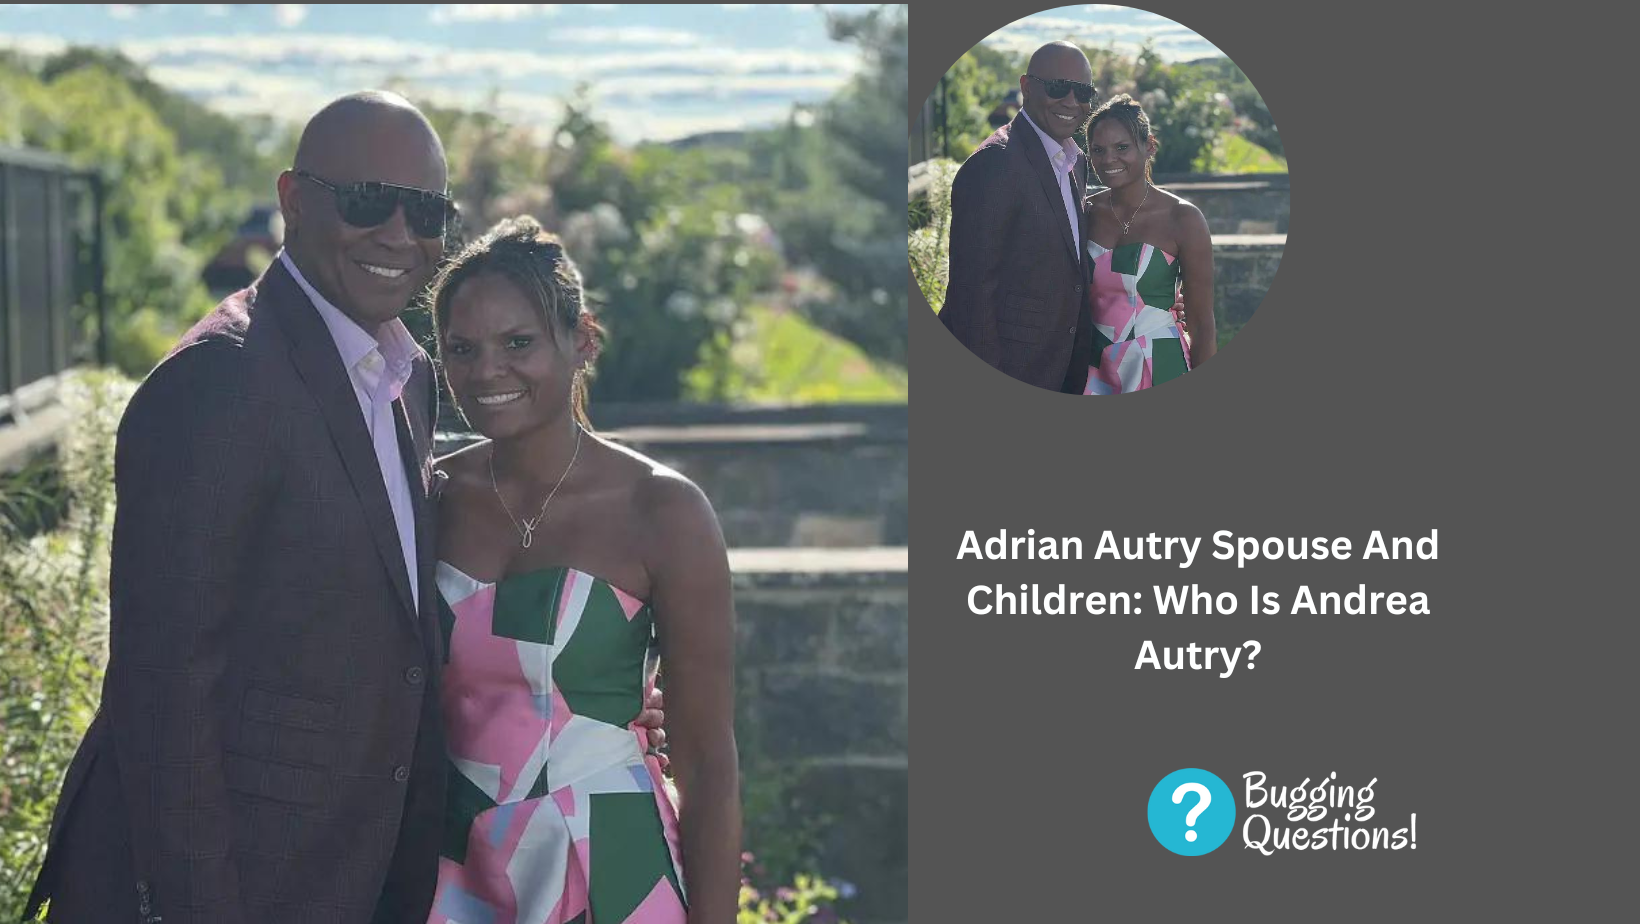 Adrian Autry Spouse And Children: Who Is Andrea Autry?